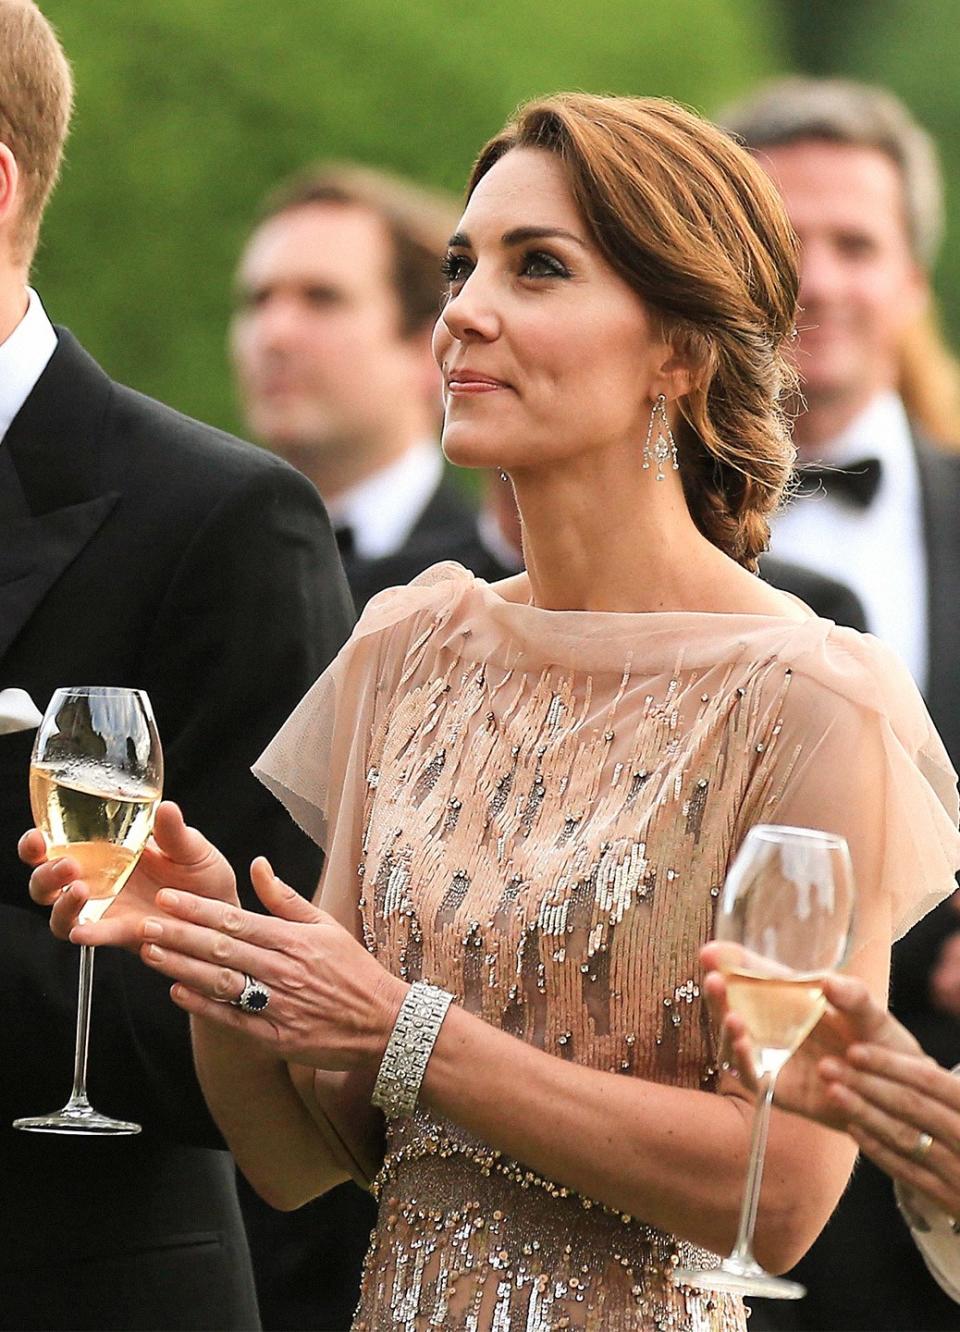 JUNE: Kate holding a glass of champagne—in an all-time-classic Middletonian gown, a repeat from 2011—makes this one of the more Platonic Ideal Kate photos. This should honestly be subbed in as her Wikipedia entry photo.